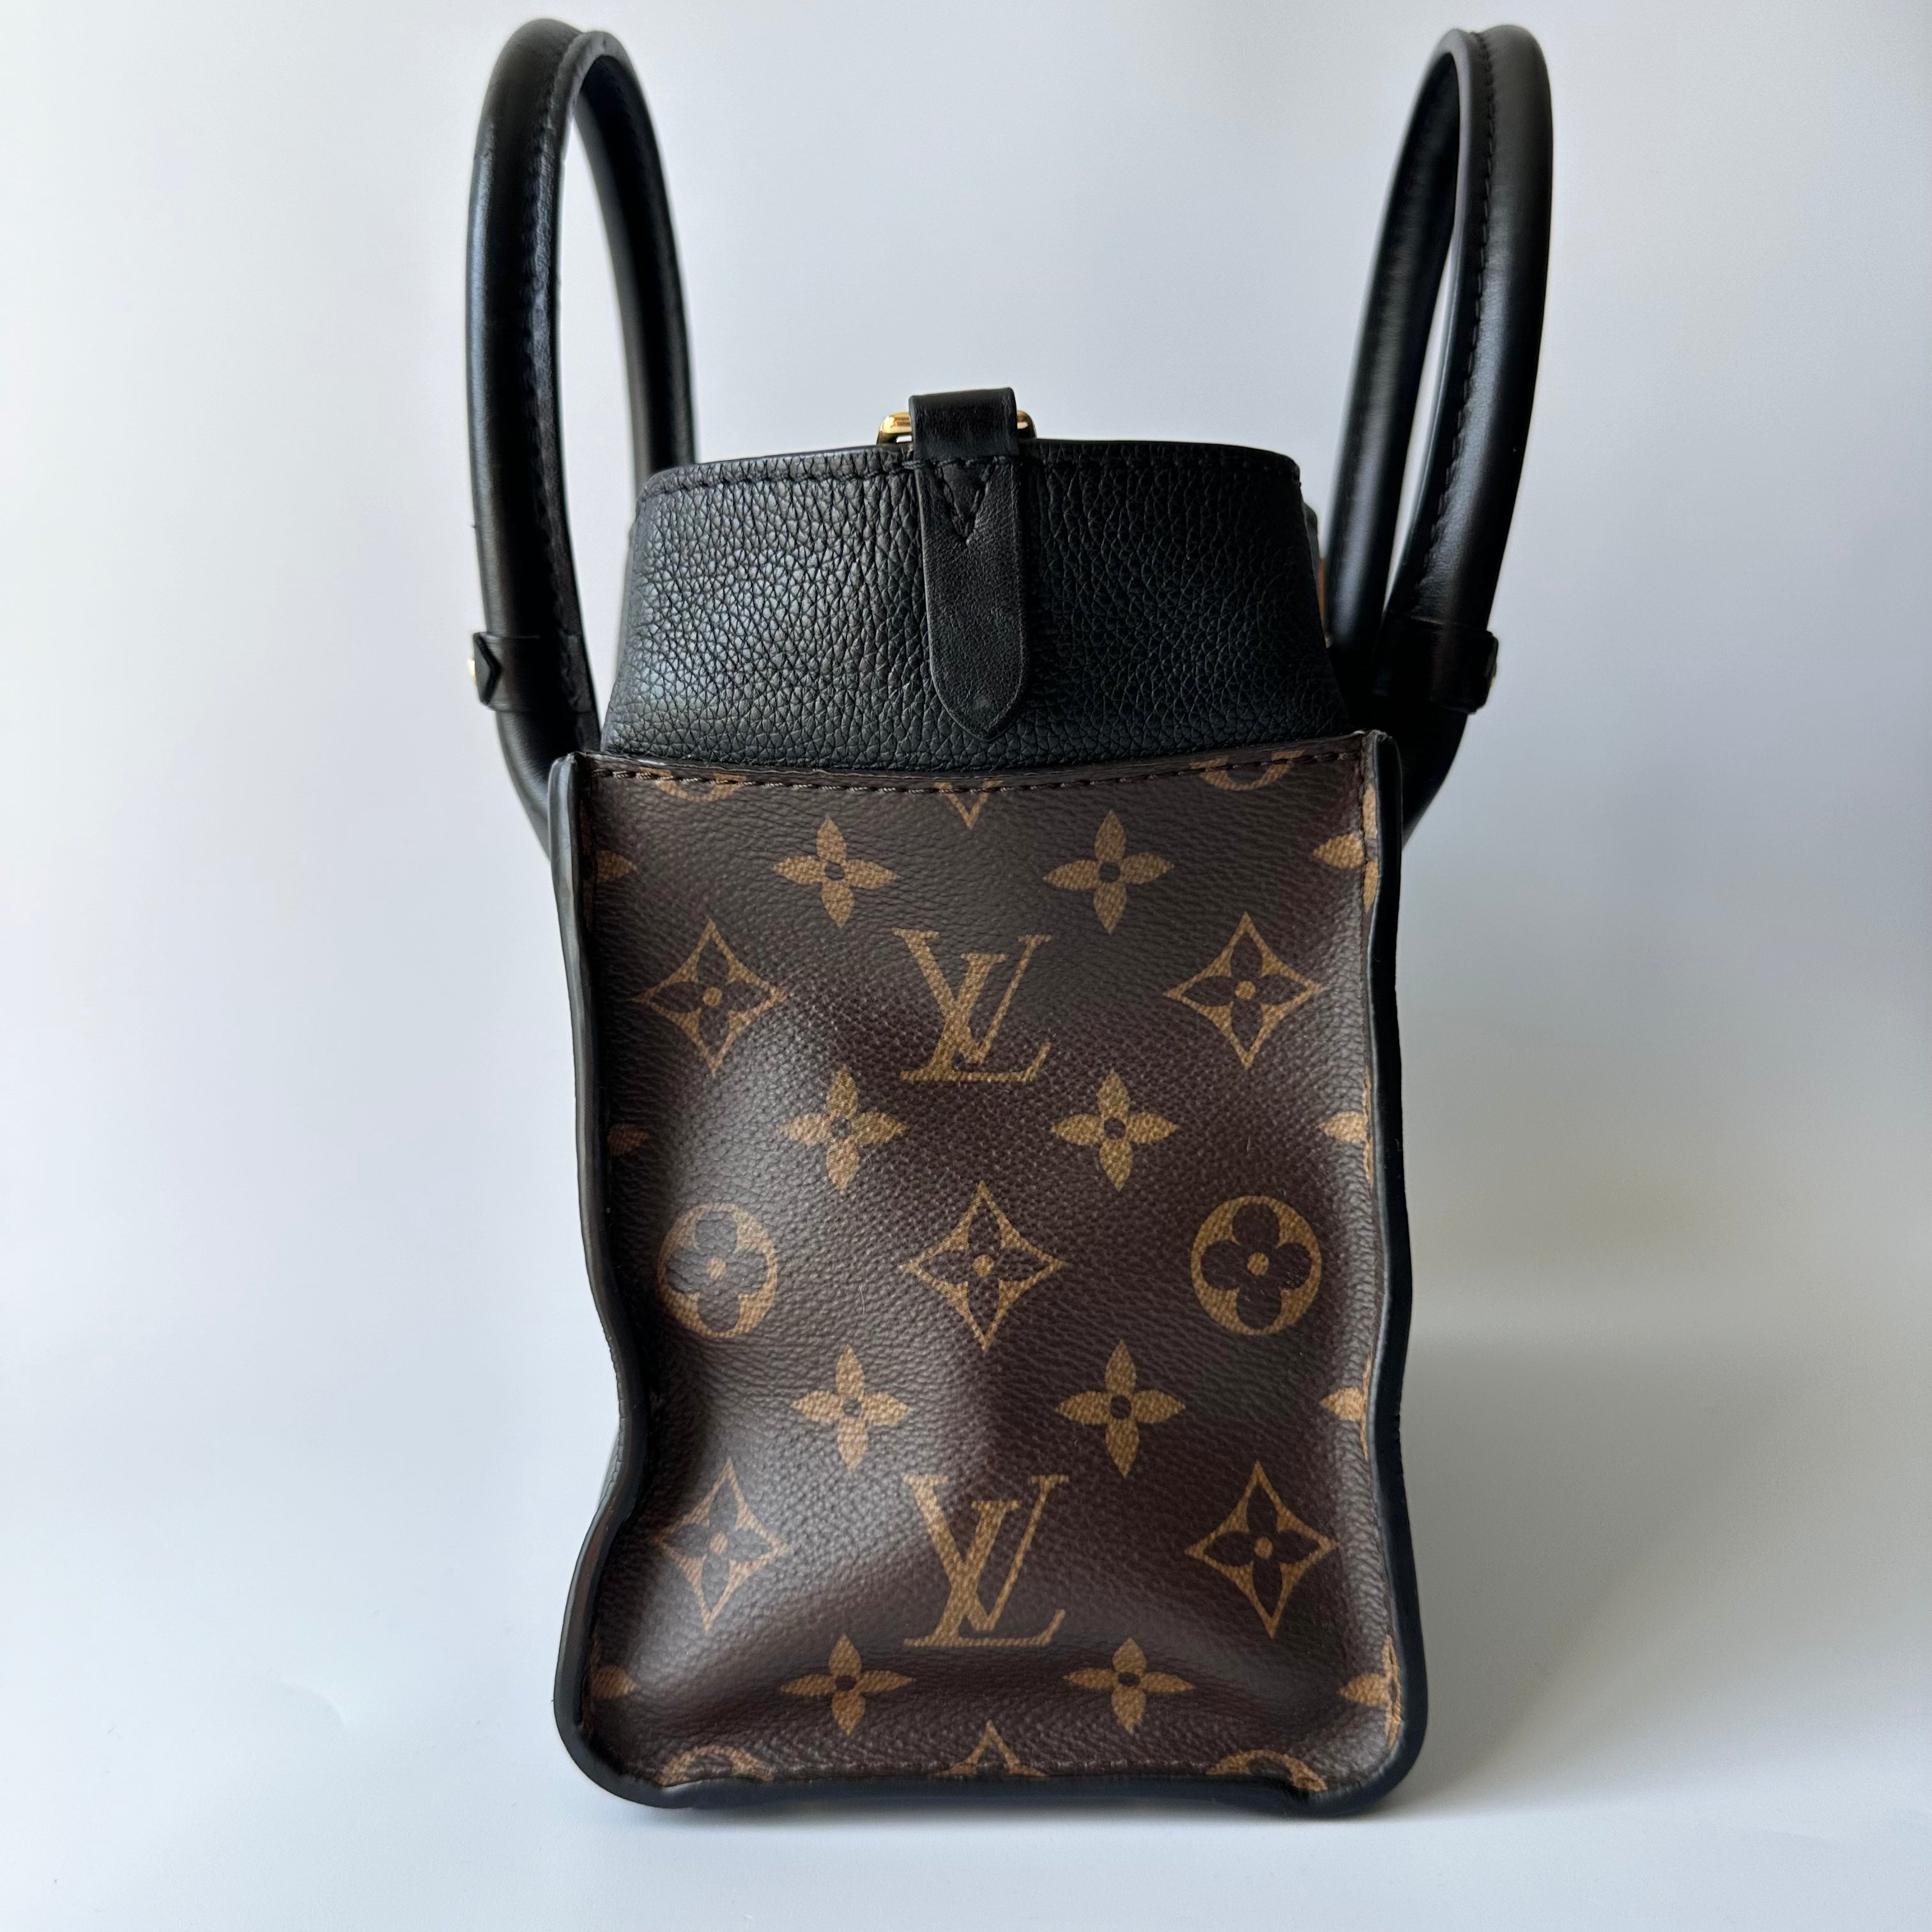 Louis Vuitton on My Side PM